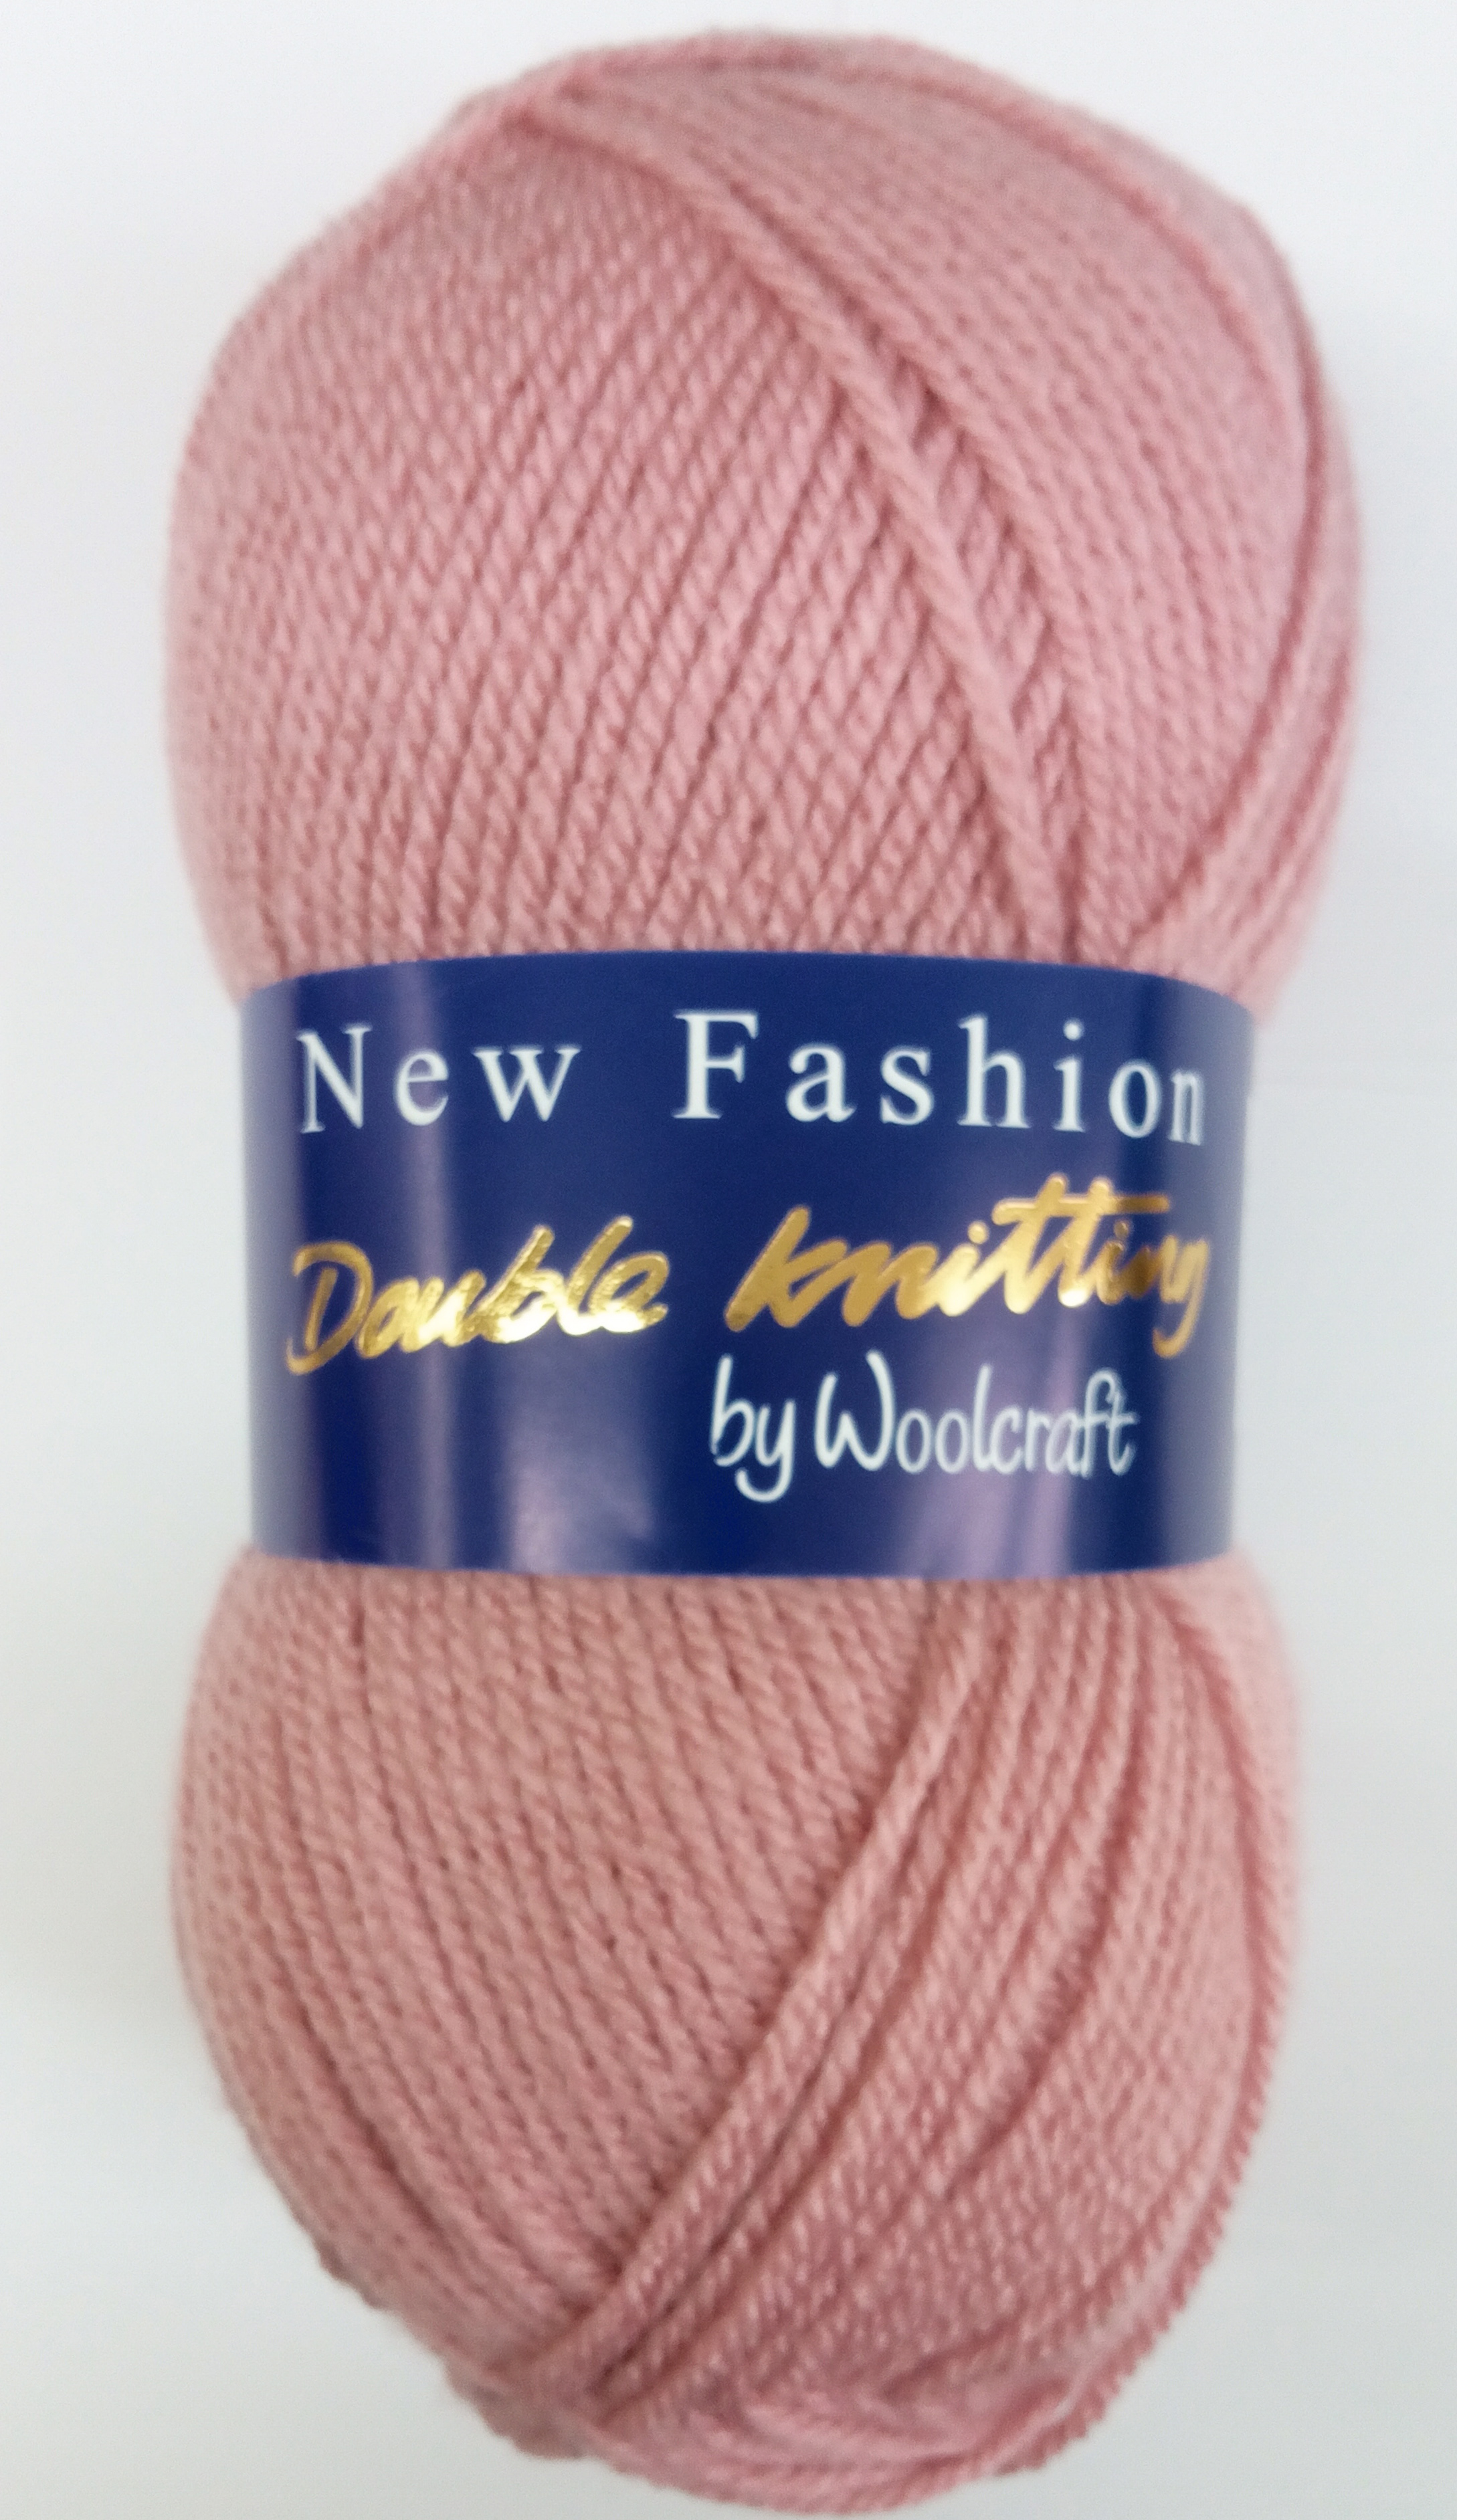 New Fashion DK Yarn 10 Pack Pale Rose 202 - Click Image to Close